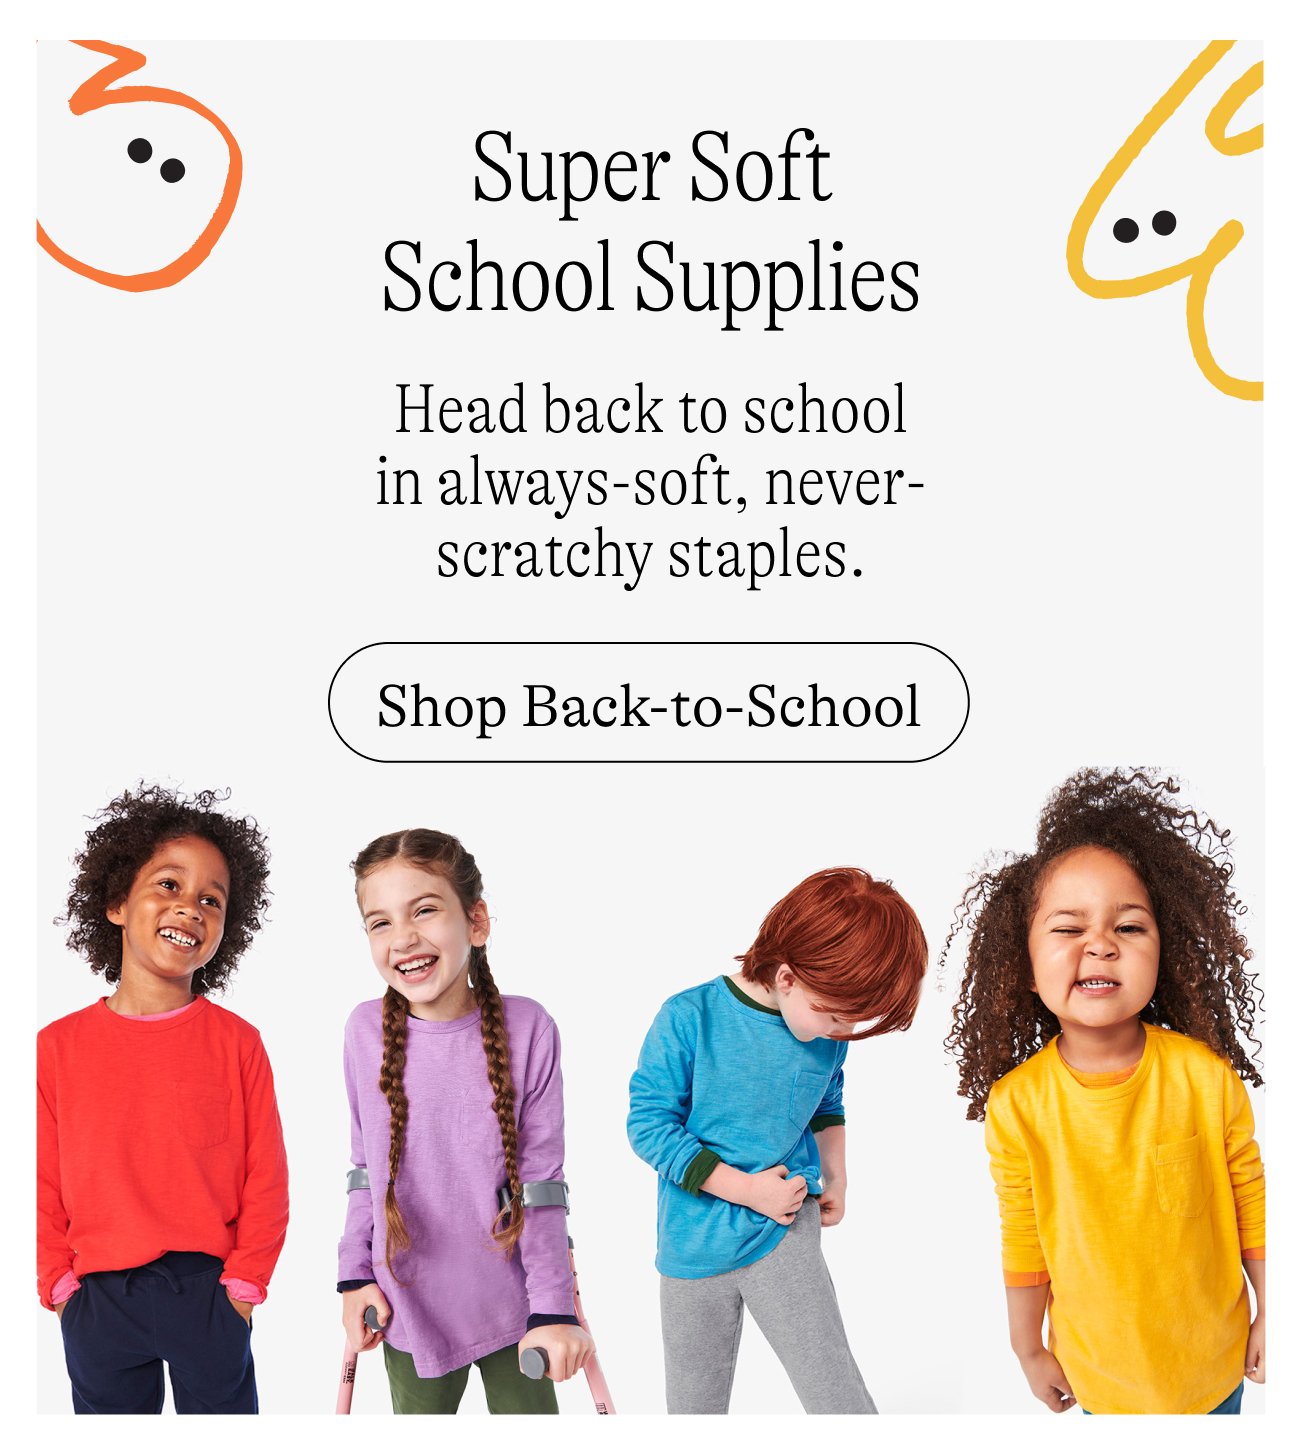 Super Soft School Supplies. Head back to school in always-soft, never-scratchy staples.